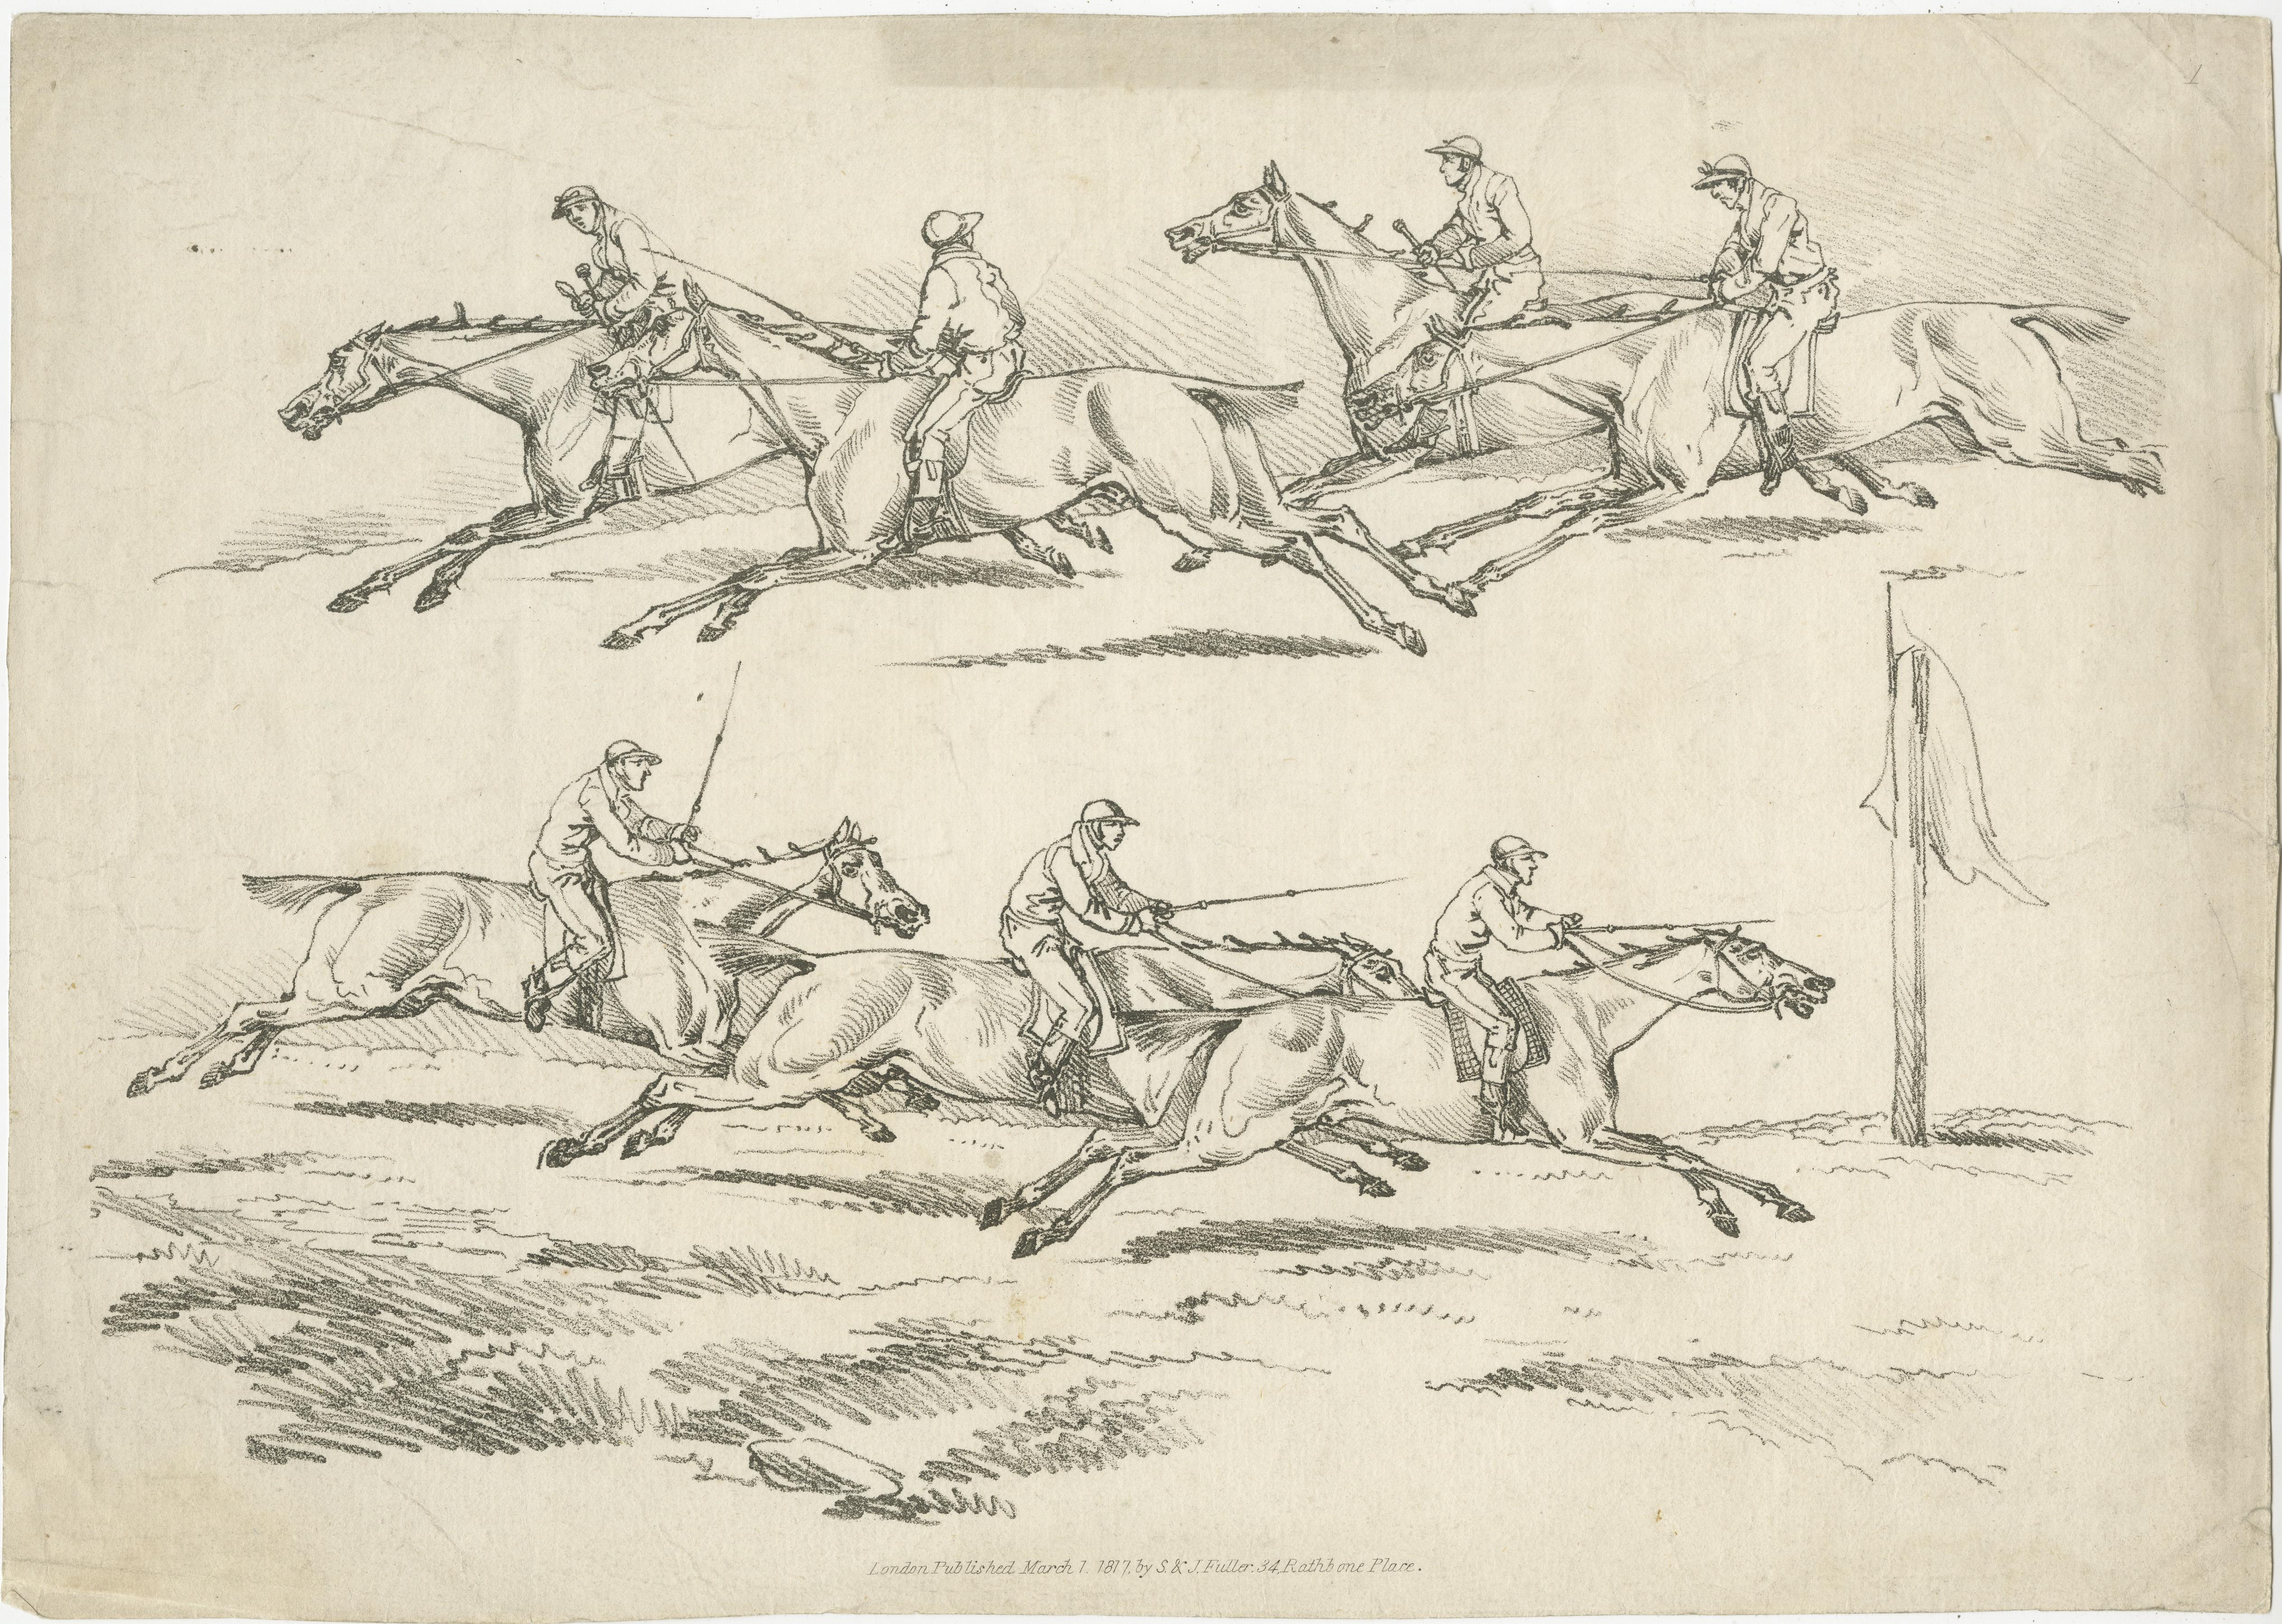 Decorative antique engraving of a horse race by Alken, Henry Thomas, 1784-1851 (Engraver). Originates from 'Sporting sketches: consisting of subjects relating to sports of. the whole illustrative of landscape scenery'. Published by S. and J. Fuller.